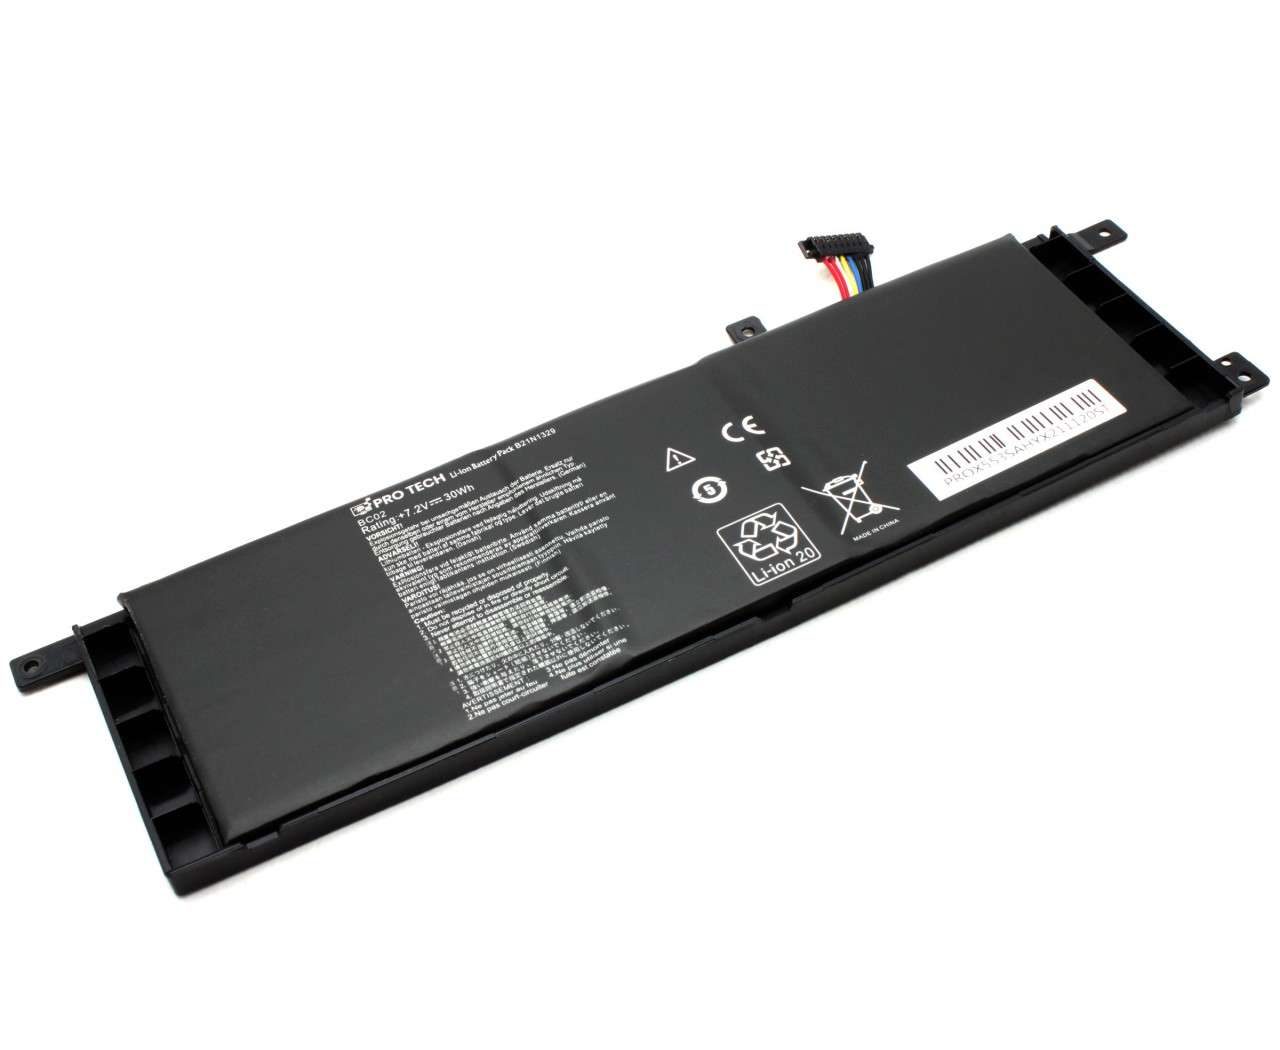 Baterie Asus 0B200 00840000 Protech High Quality Replacement